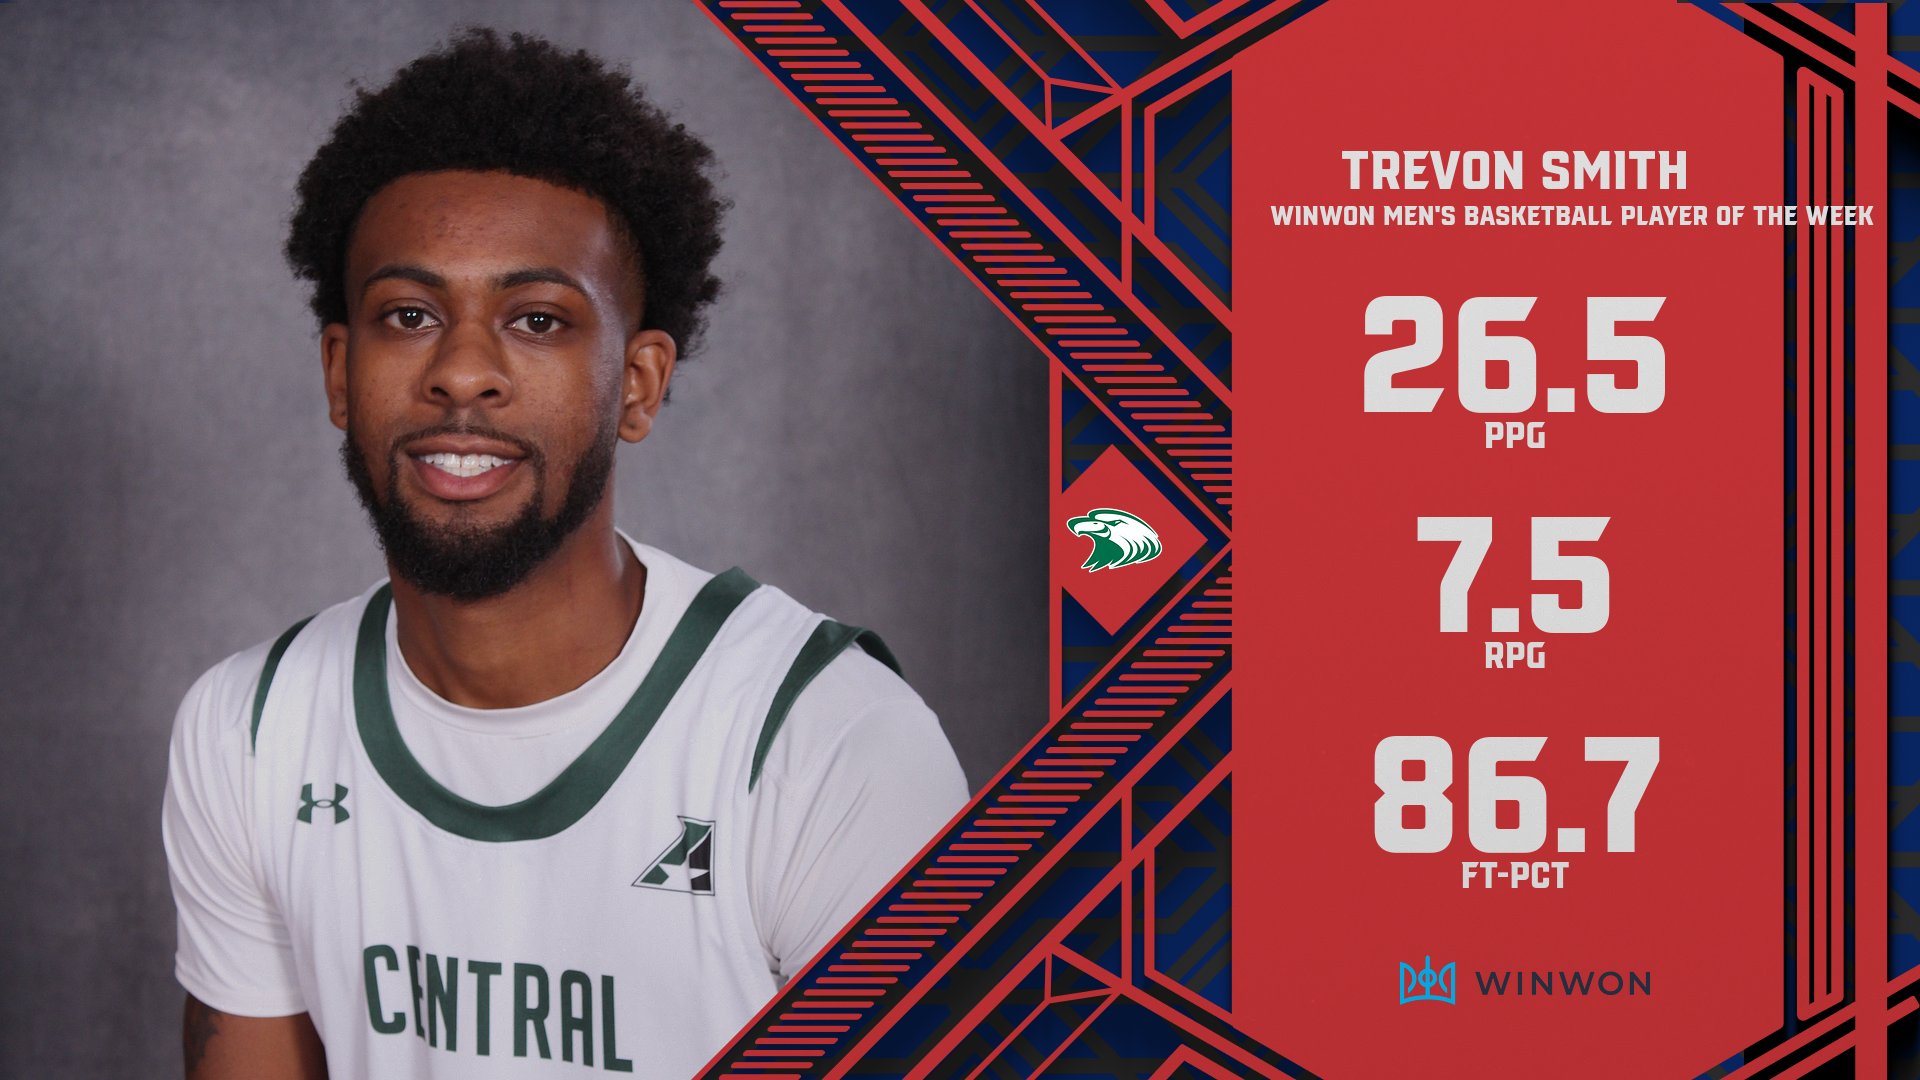 TreVon Smith of Central Methodist University Earns Second WinWon Men’s Basketball Player of the Week of 2023-24